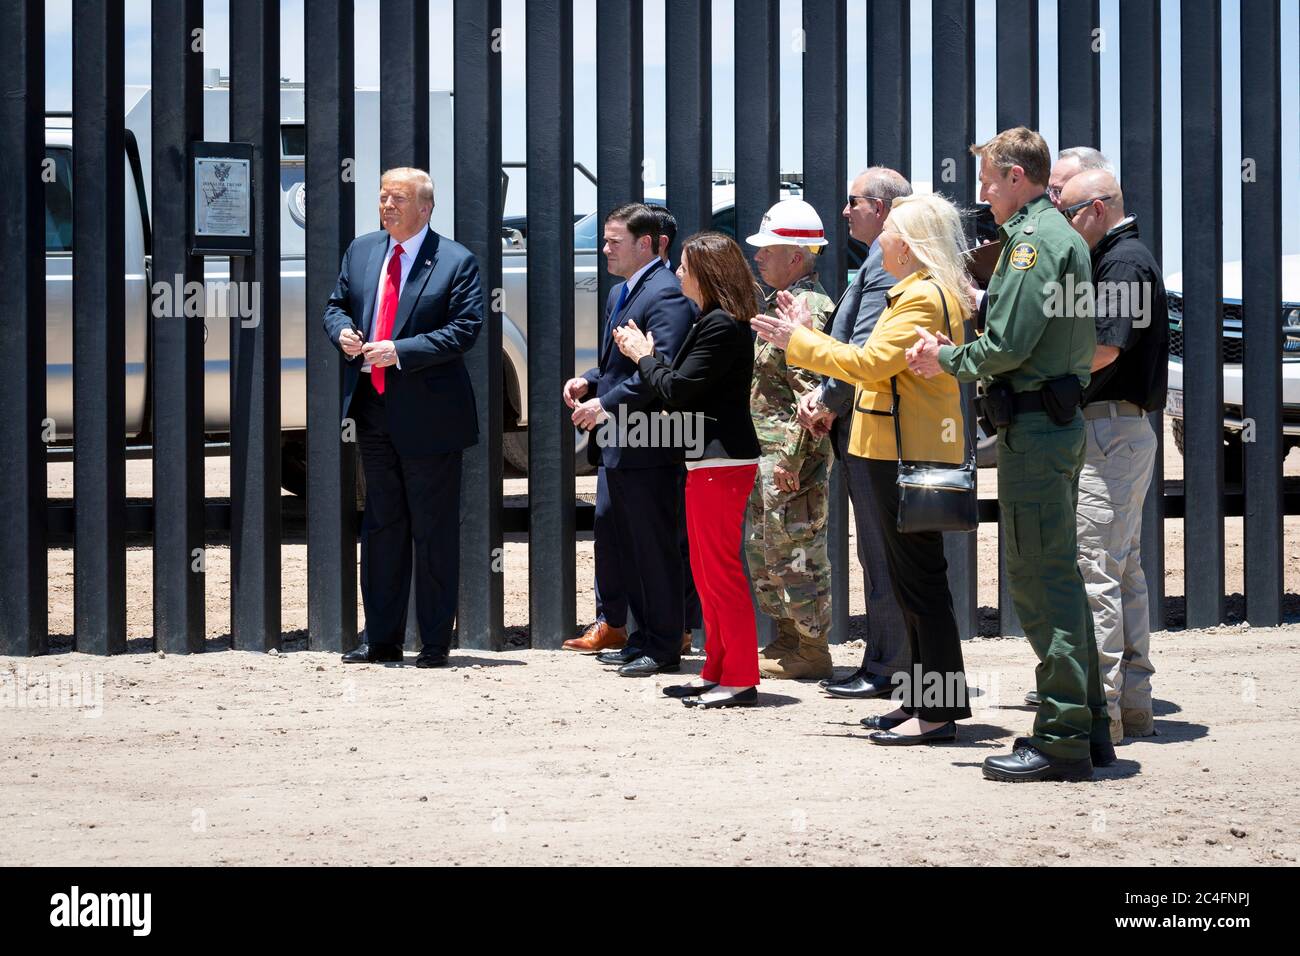 U.S. President Donald Trump is applauded by Arizona Gov. Doug Ducey, Acting DHS Secretary Chad Wolf, Rep. Debbie Lesko, Senator Martha McSally and Acting CBP Commissioner Mark Morgan during a visit to the Mexican-American border June 23, 2020 in San Luis, Arizona. The visit marked the completion of 200 miles of border wall, the majority of which is replacement for existing structure at a cost of $20-million dollars a mile. Stock Photo